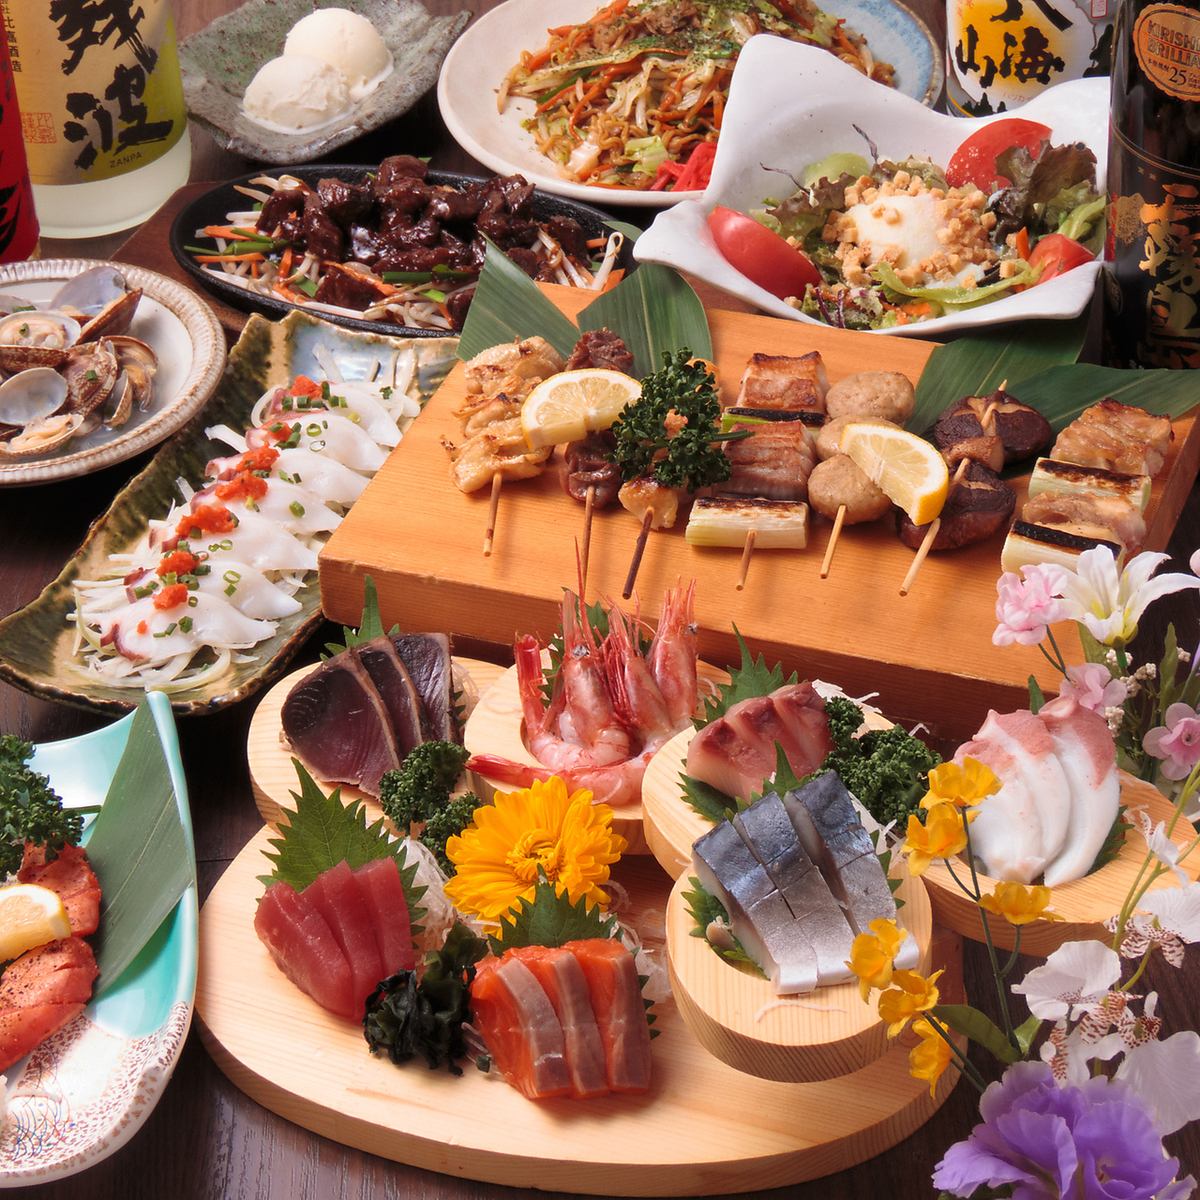 An order buffet style, which is rare in izakaya! The sashimi is also extremely fresh!